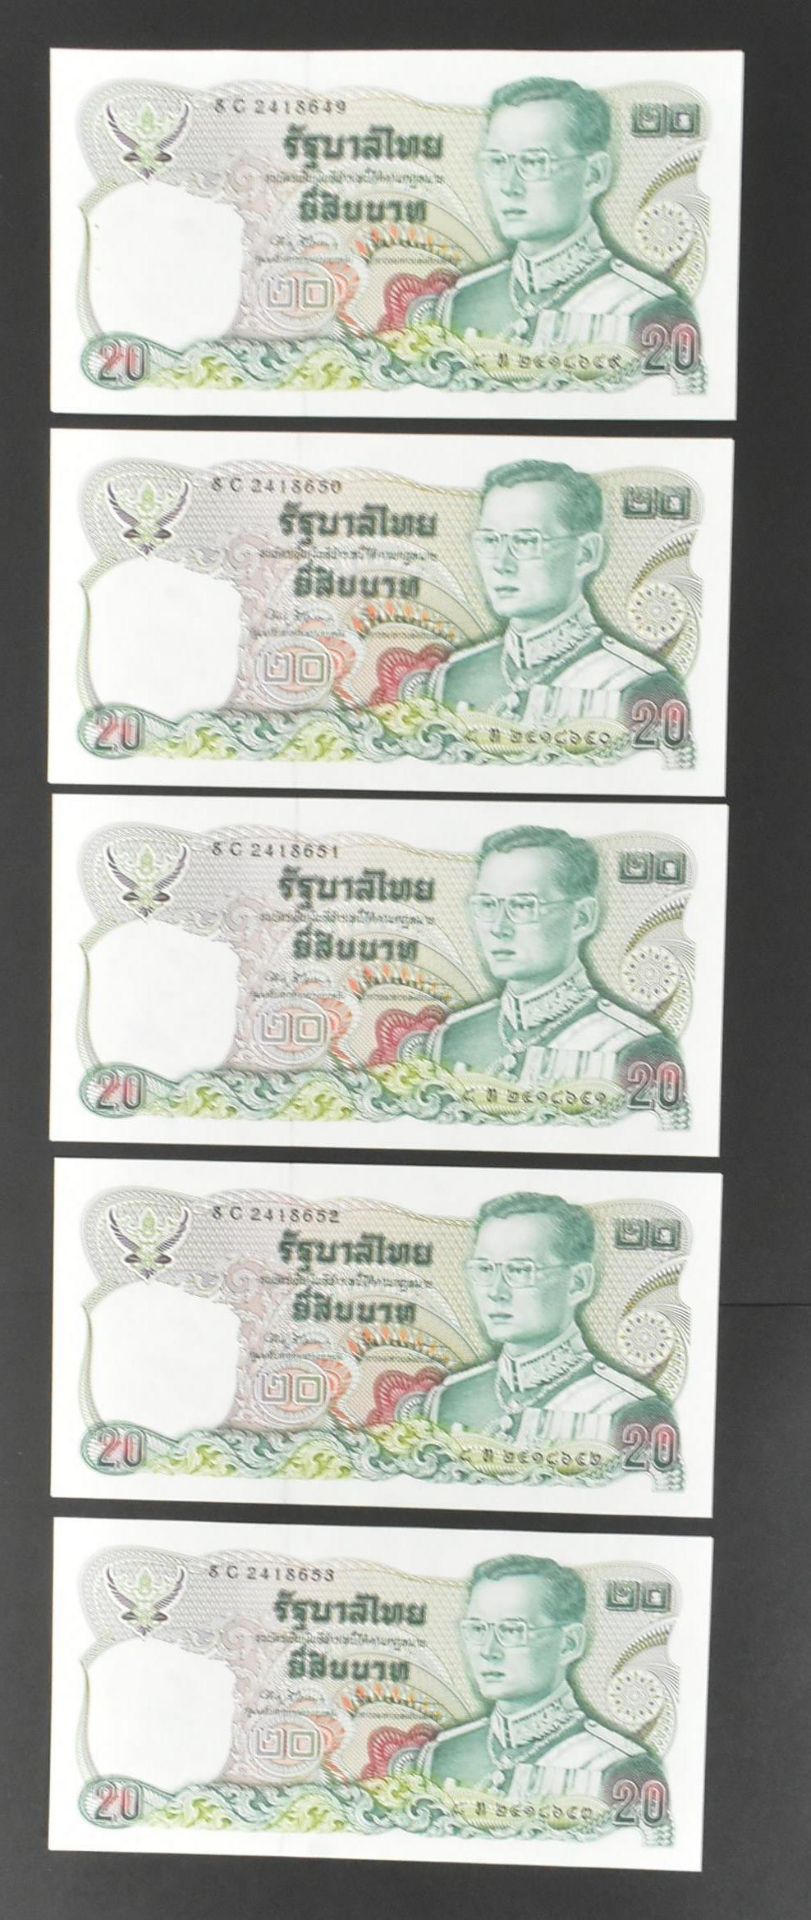 COLLECTION OF INTERNATIONAL UNCIRCULATED BANK NOTES - Image 9 of 36